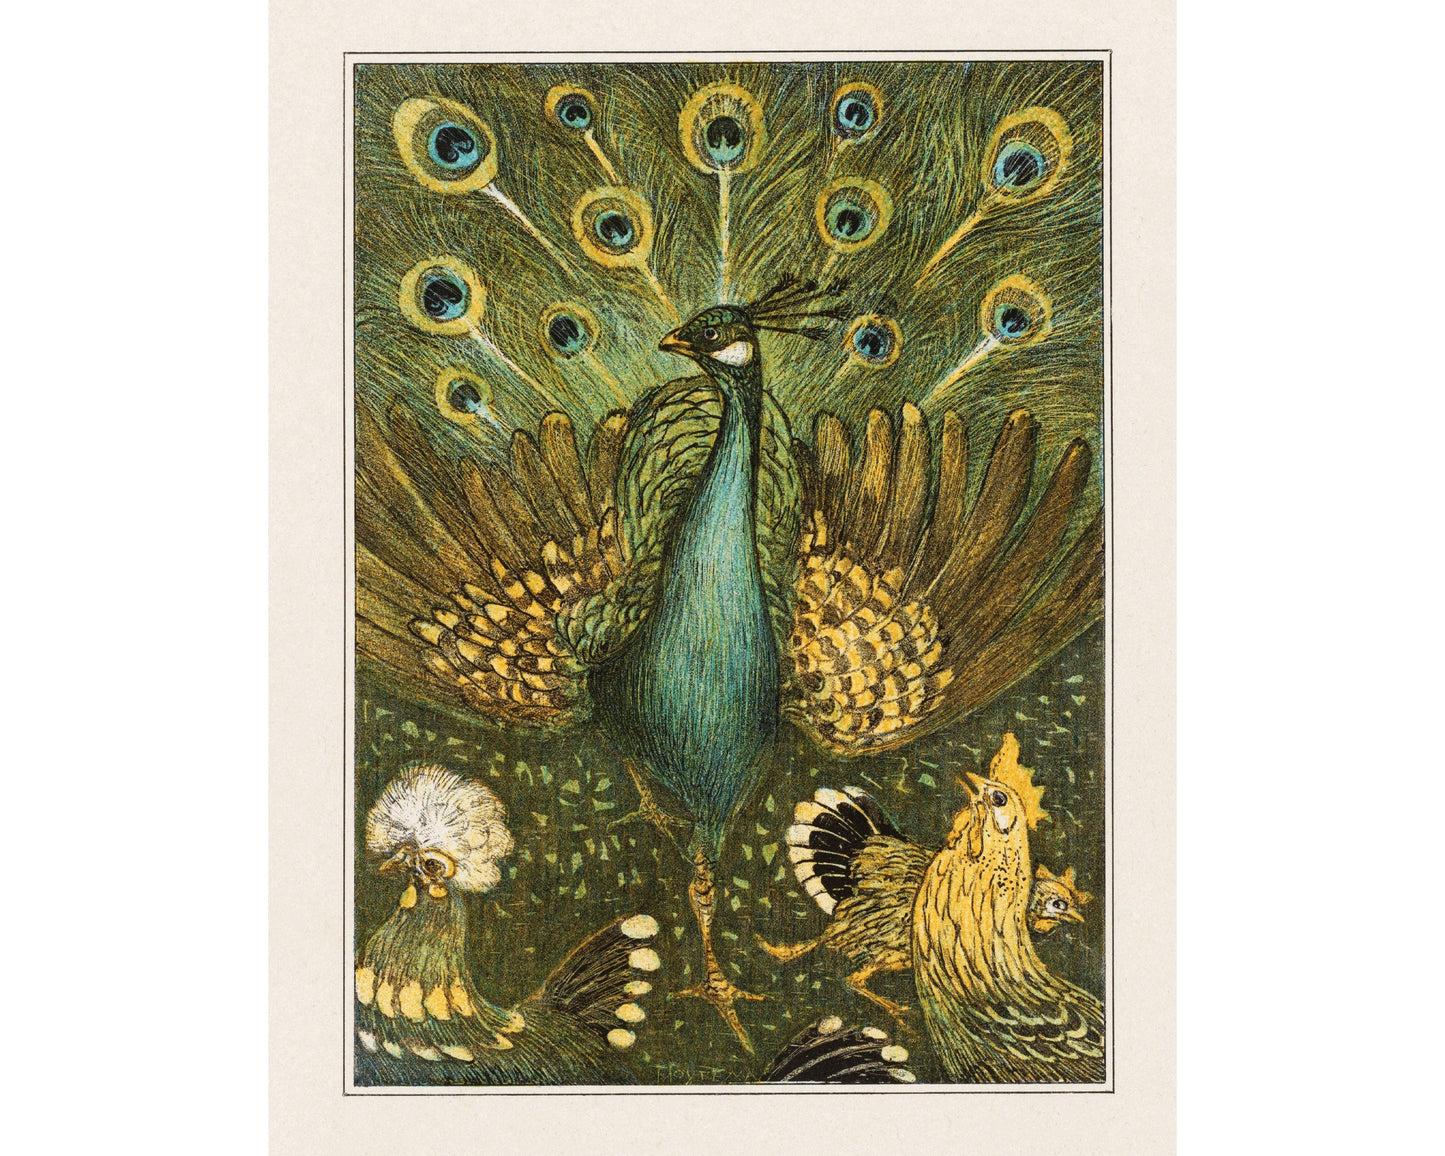 Vintage peacock and chickens painting | Giclée fine art print | Farm, animal and nature art | Modern Vintage decor | Eco-friendly gift